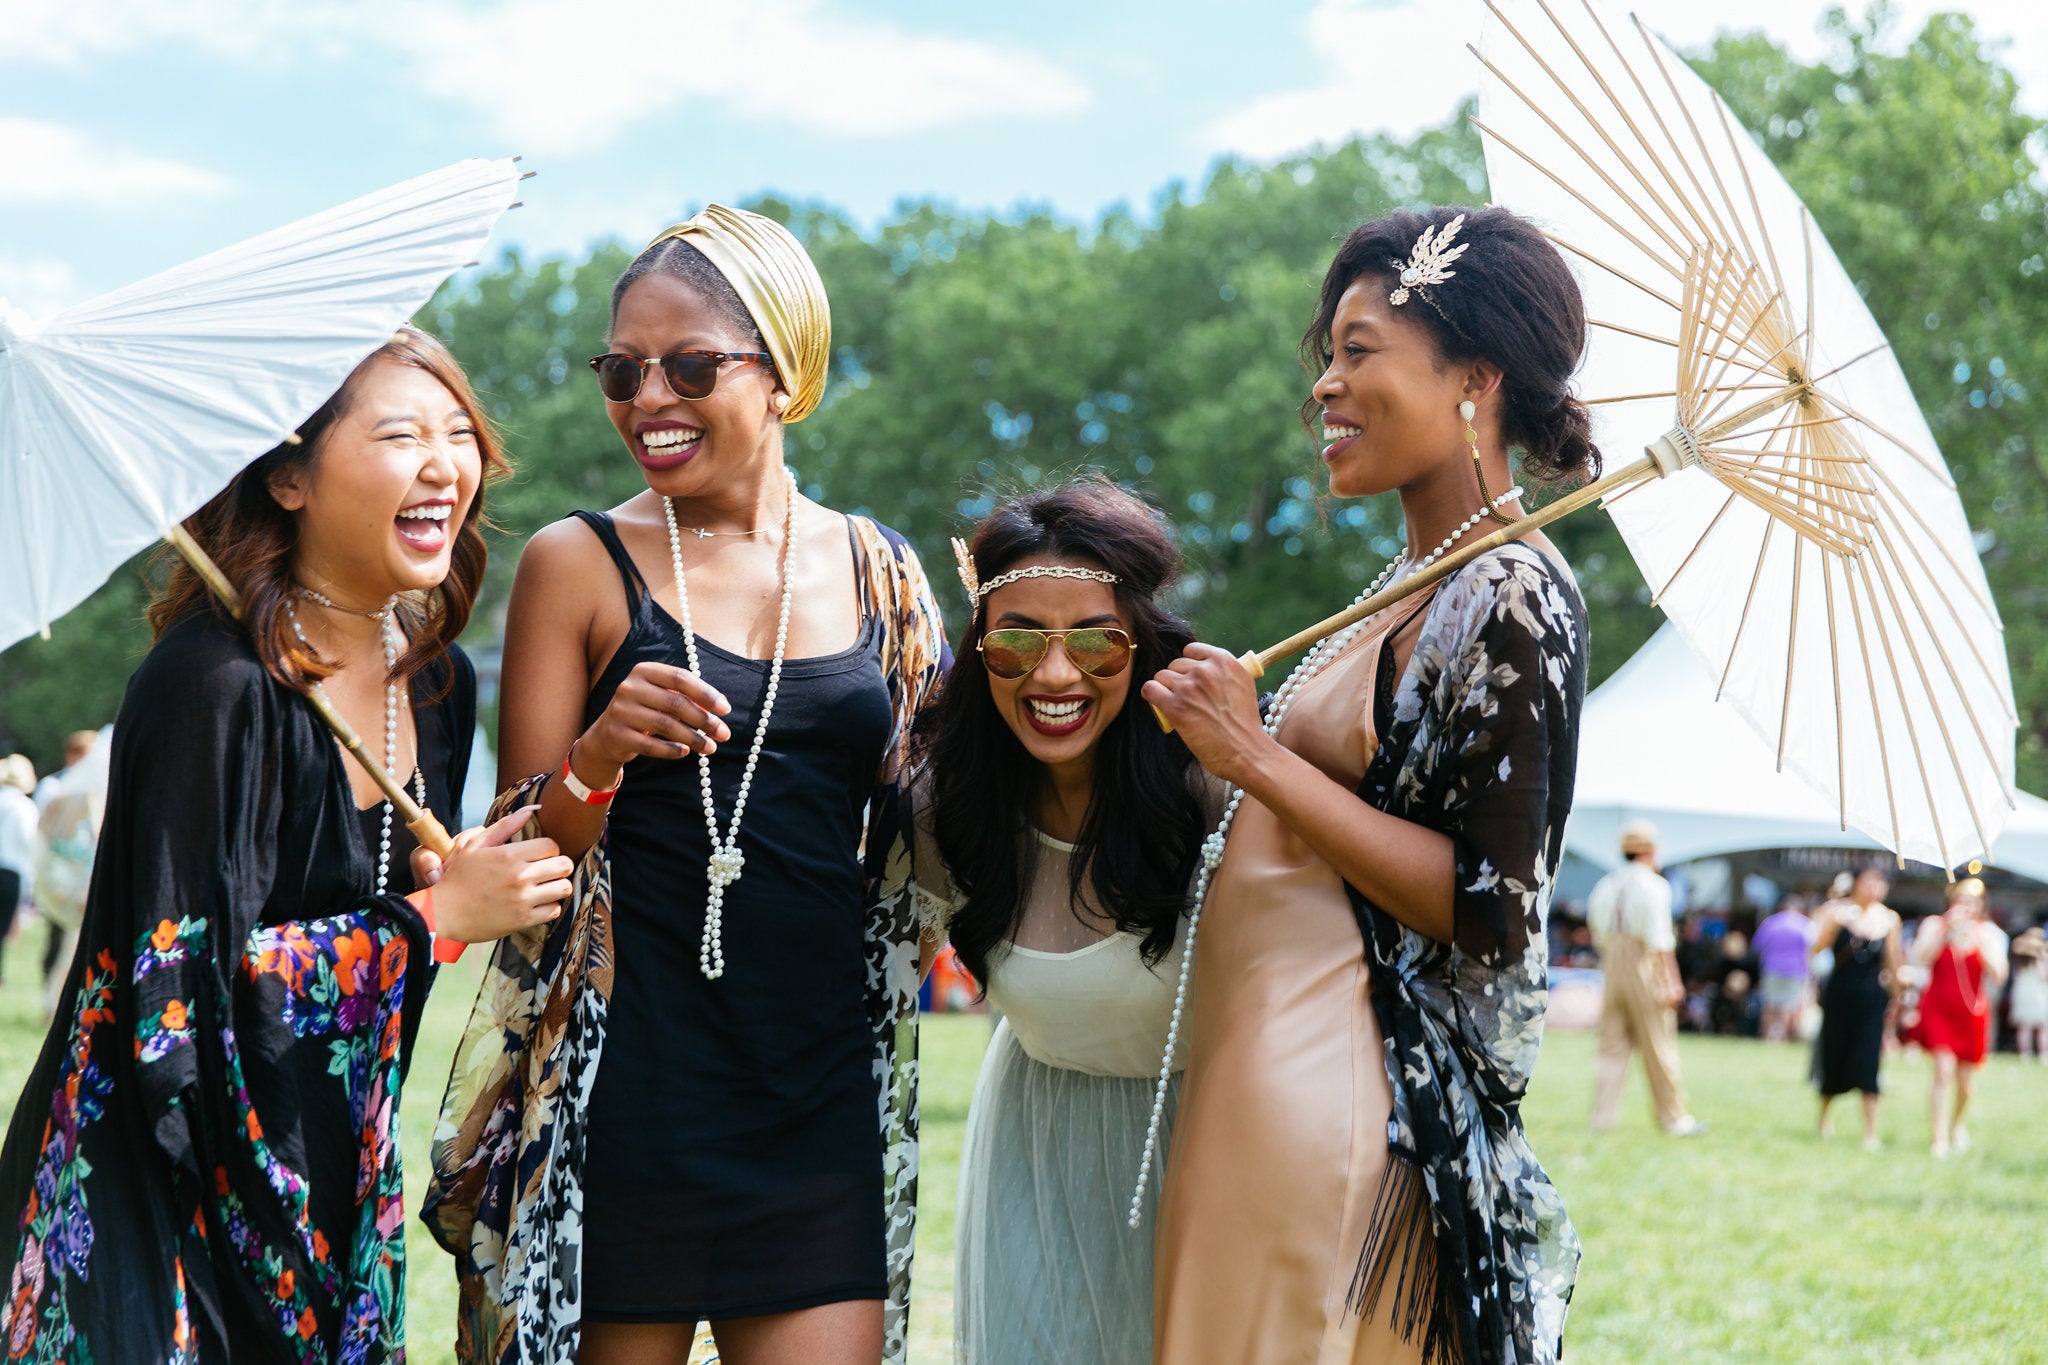 Go Back to the Roaring '20s With These Fabulous Looks From the 12th Annual Jazz Age Lawn Party
